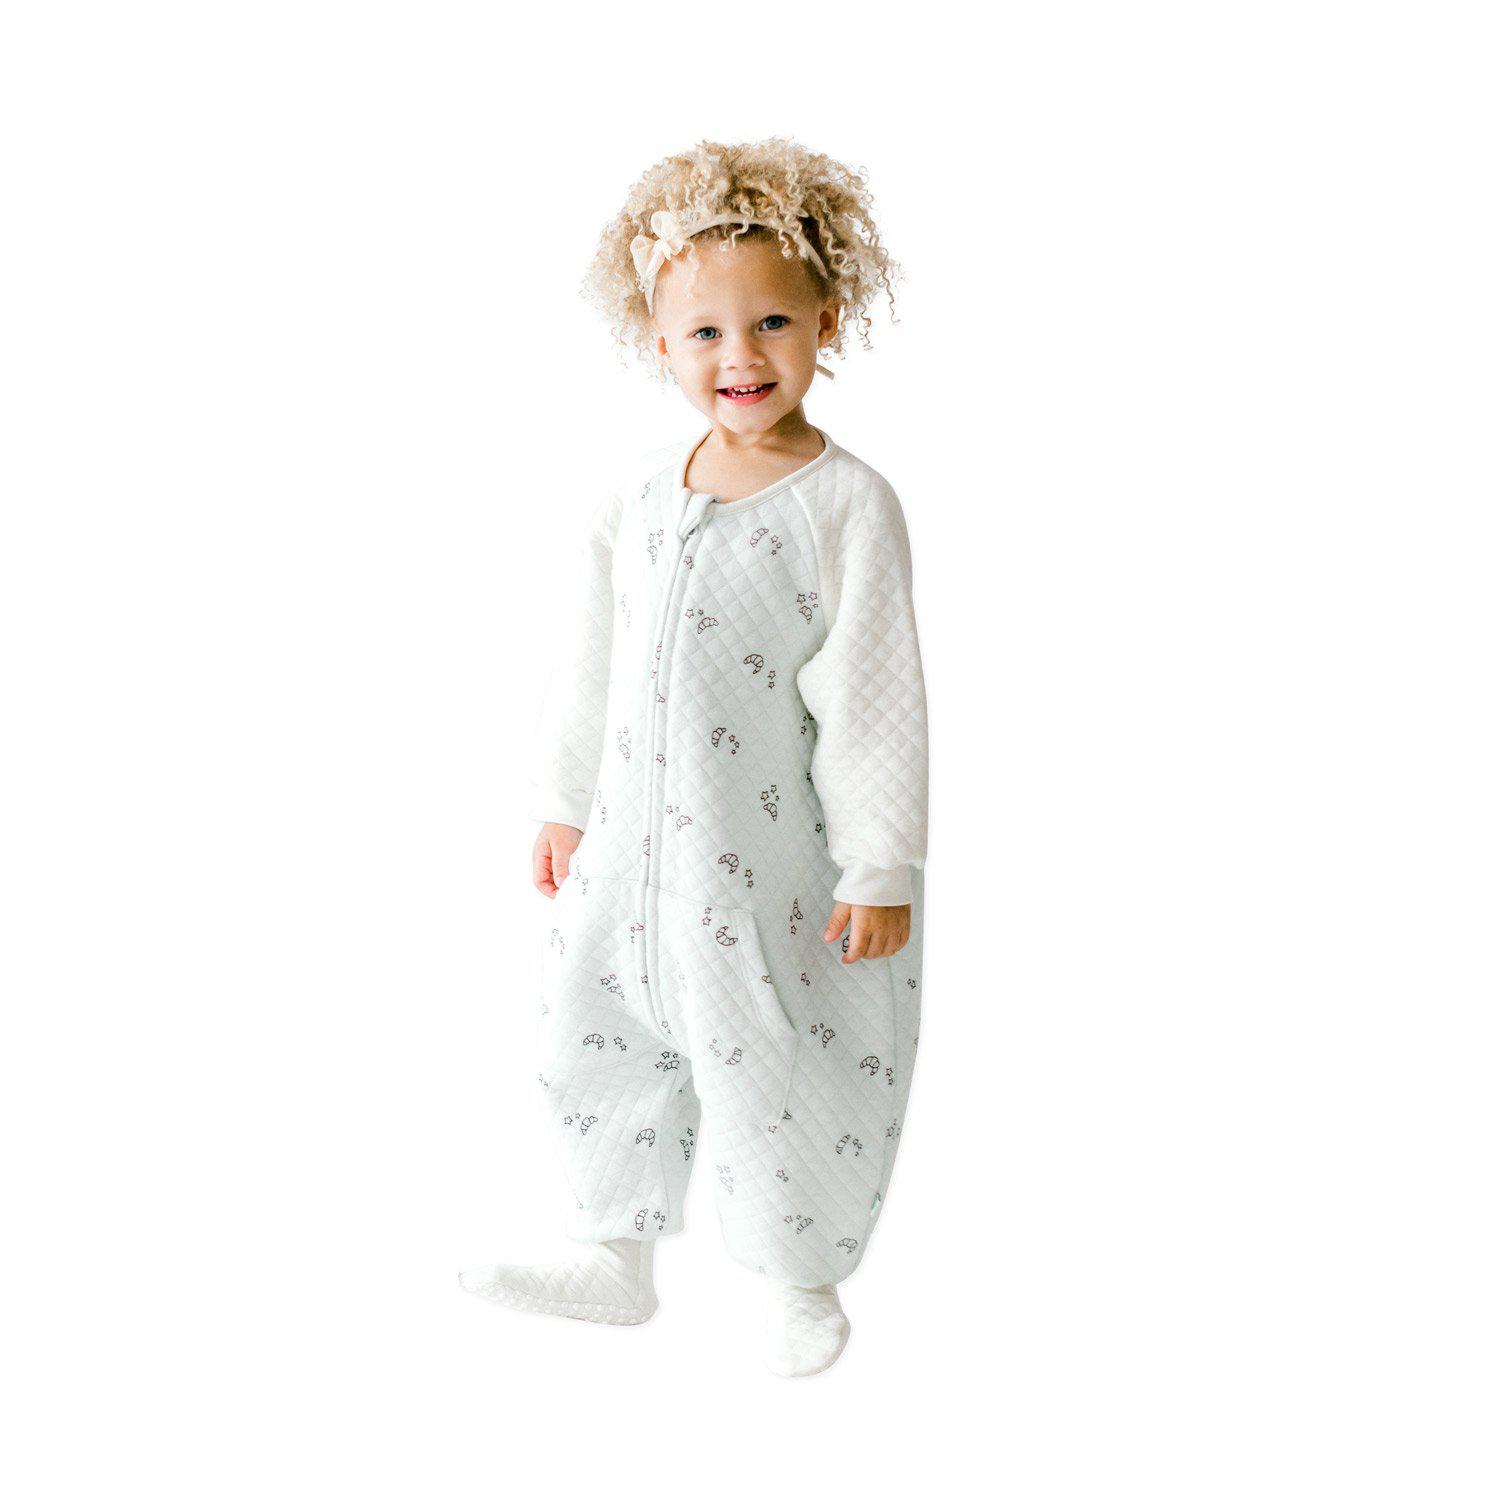 Baby wearing Sleep Sack Tealbee Dreamsie Croissant 0.8 TOG available from sizes 12m - 4T